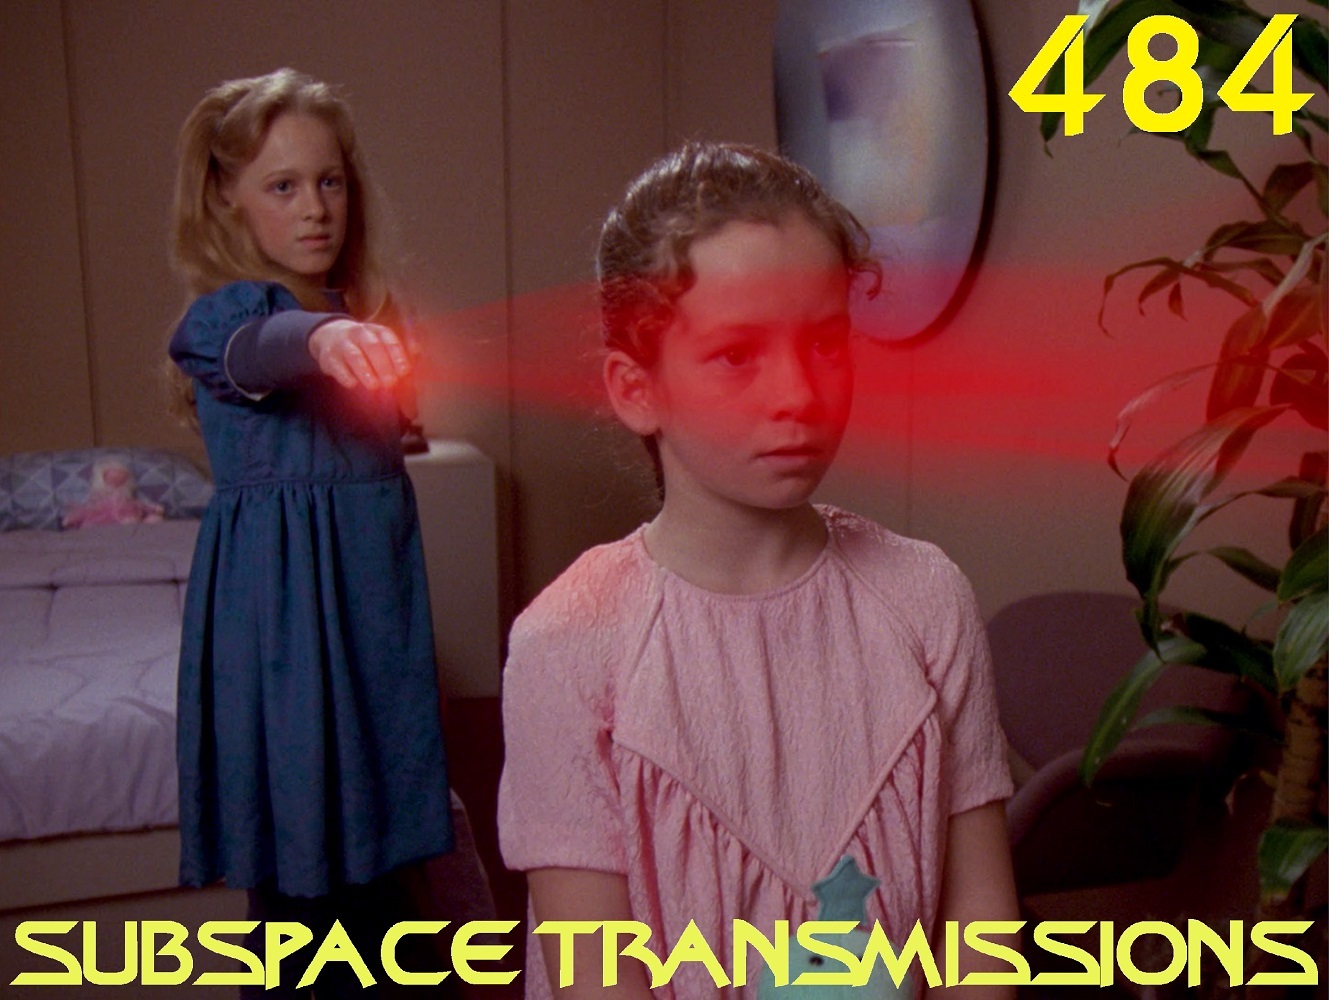 Subspace_4847l538.jpg